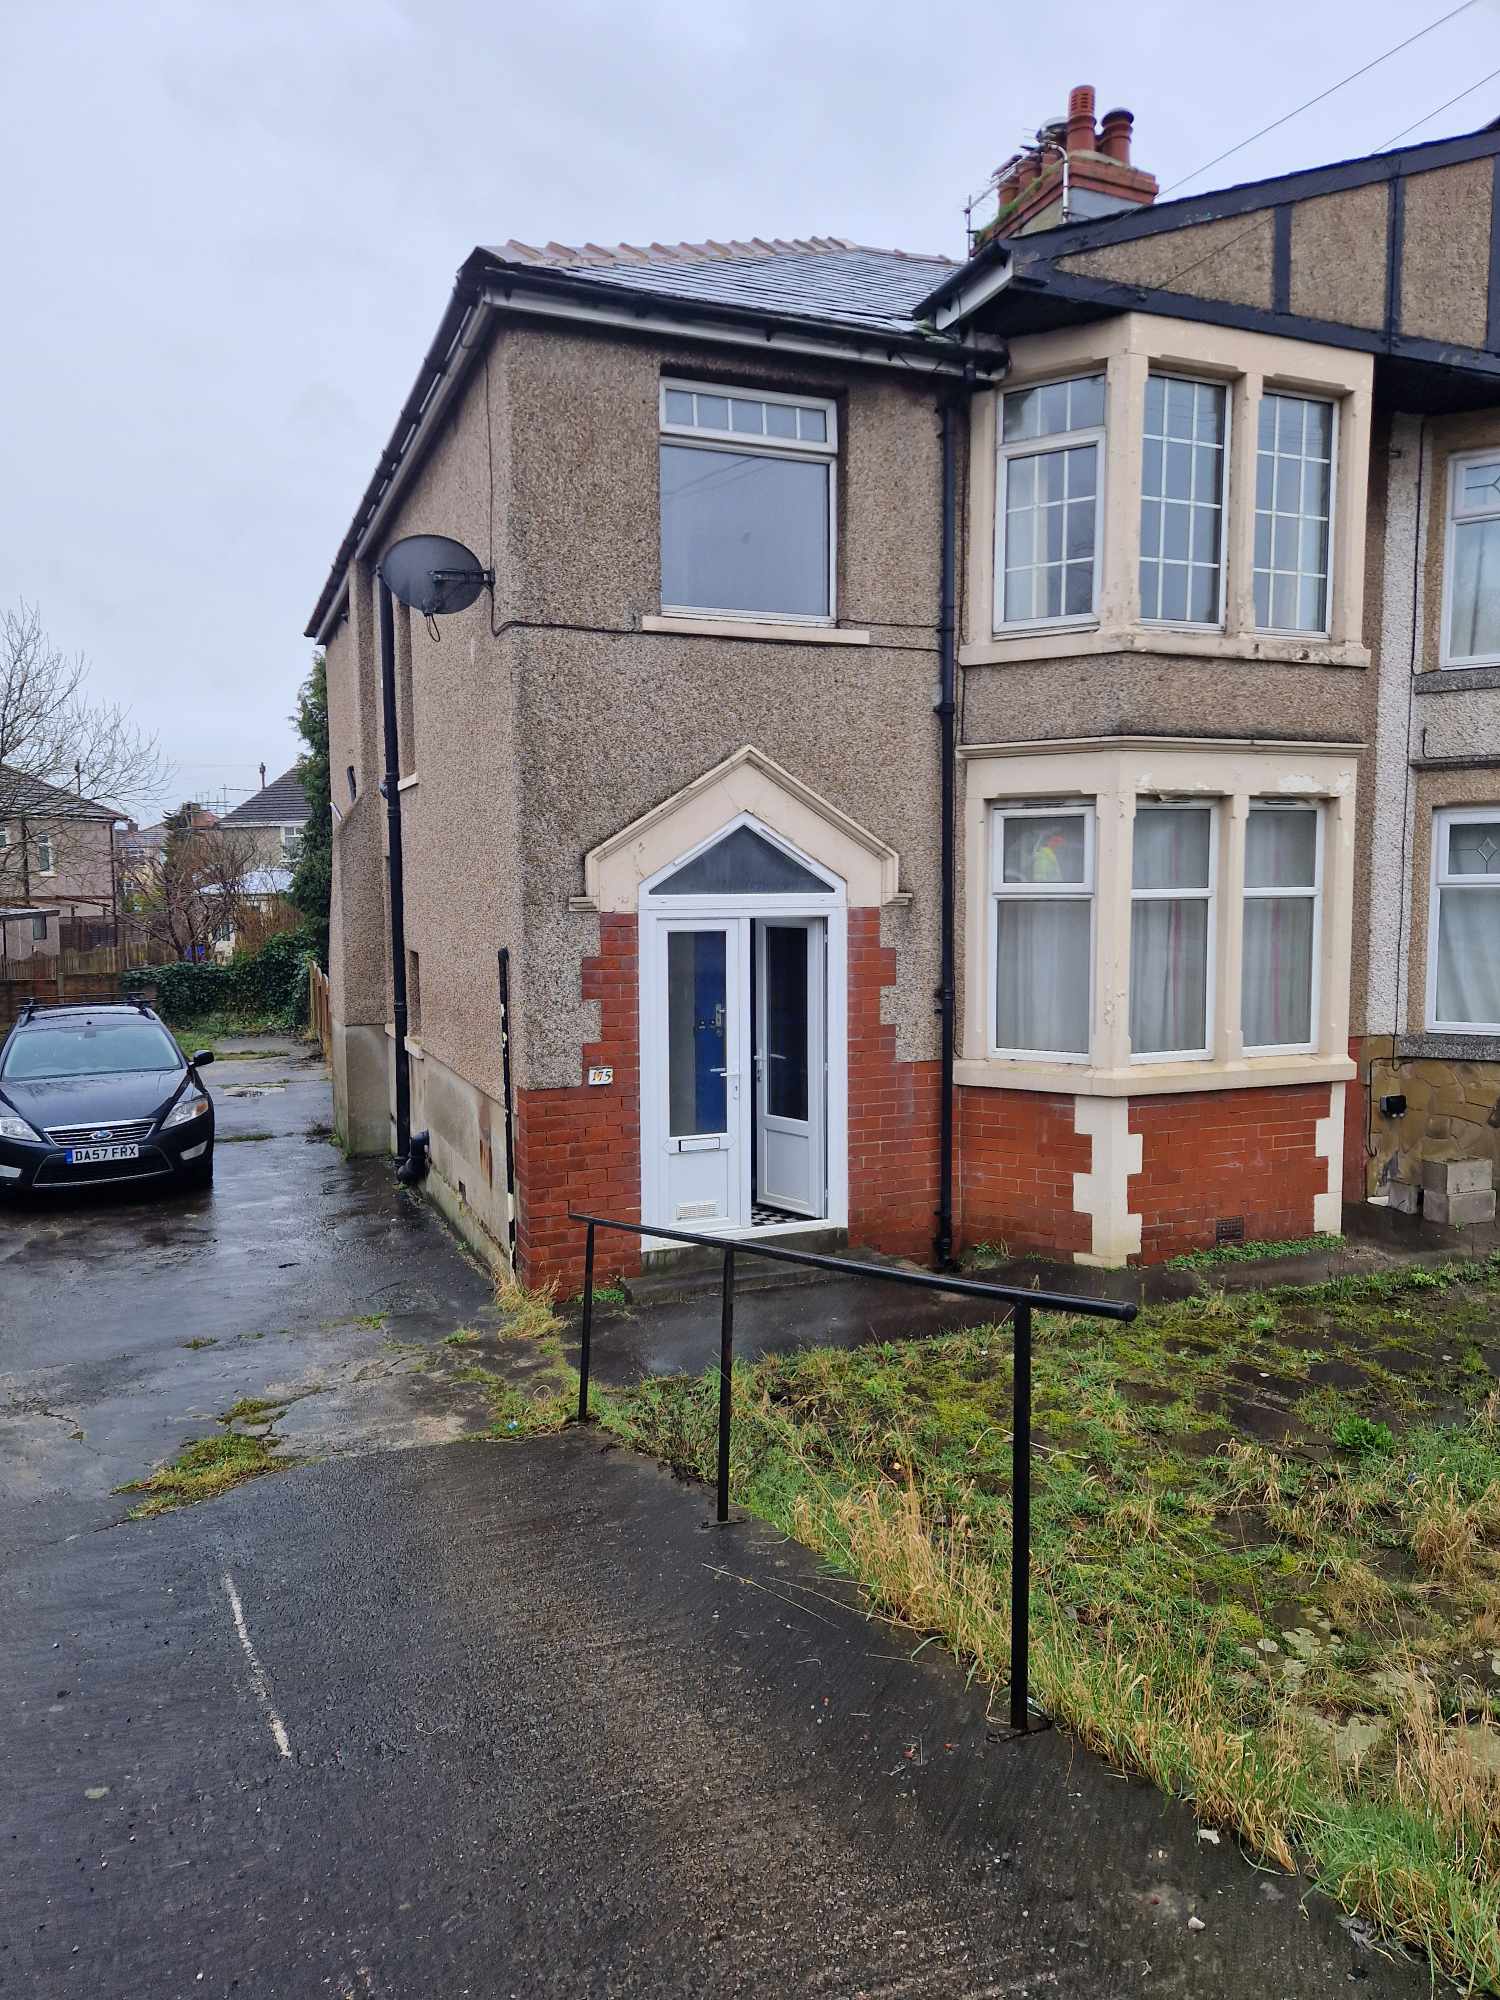 175 West End Road, Morecambe *2 Bedrooms*